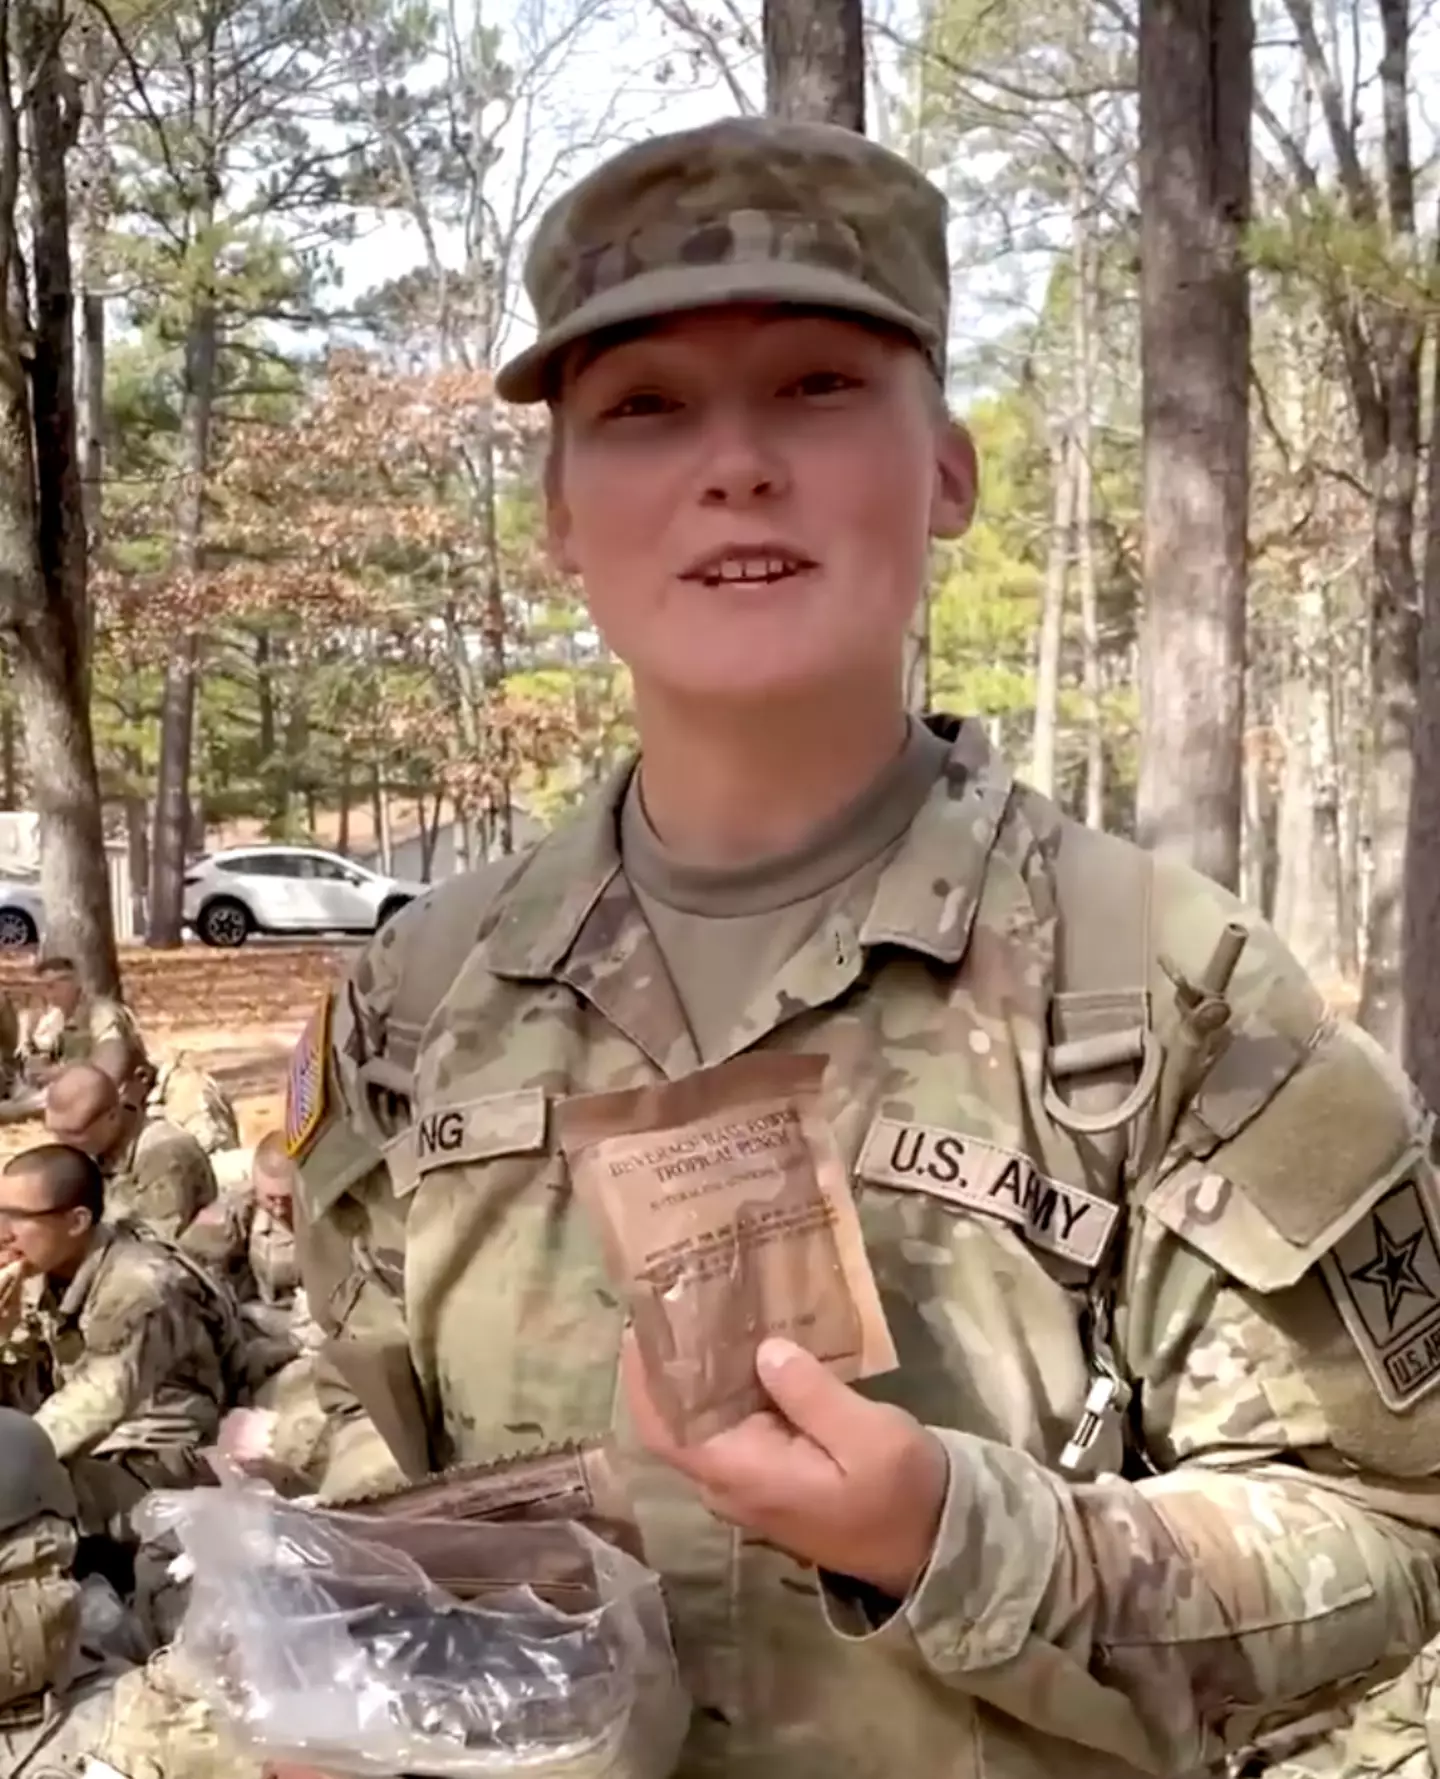 A US soldier shows off her MRE.